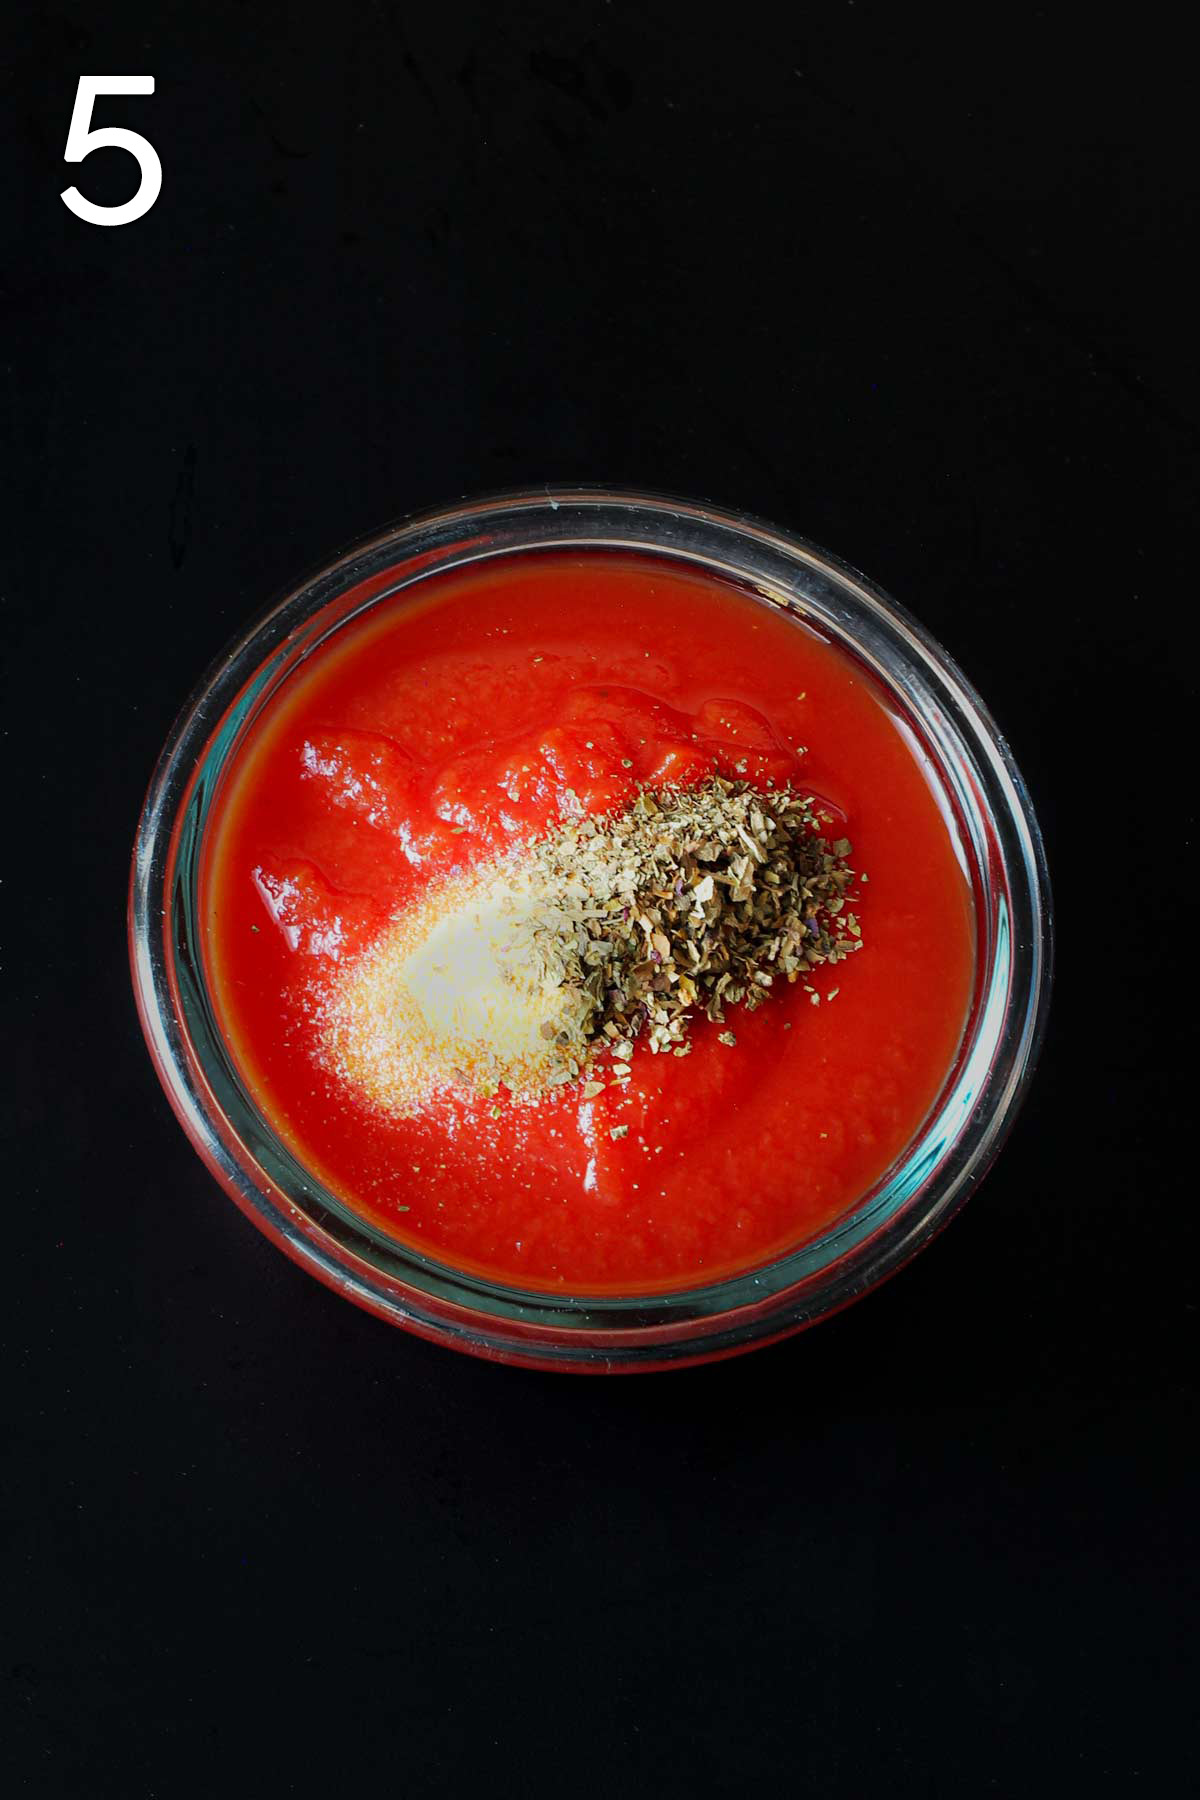 tomato sauce and herbs in small glass bowl on black tabletop.